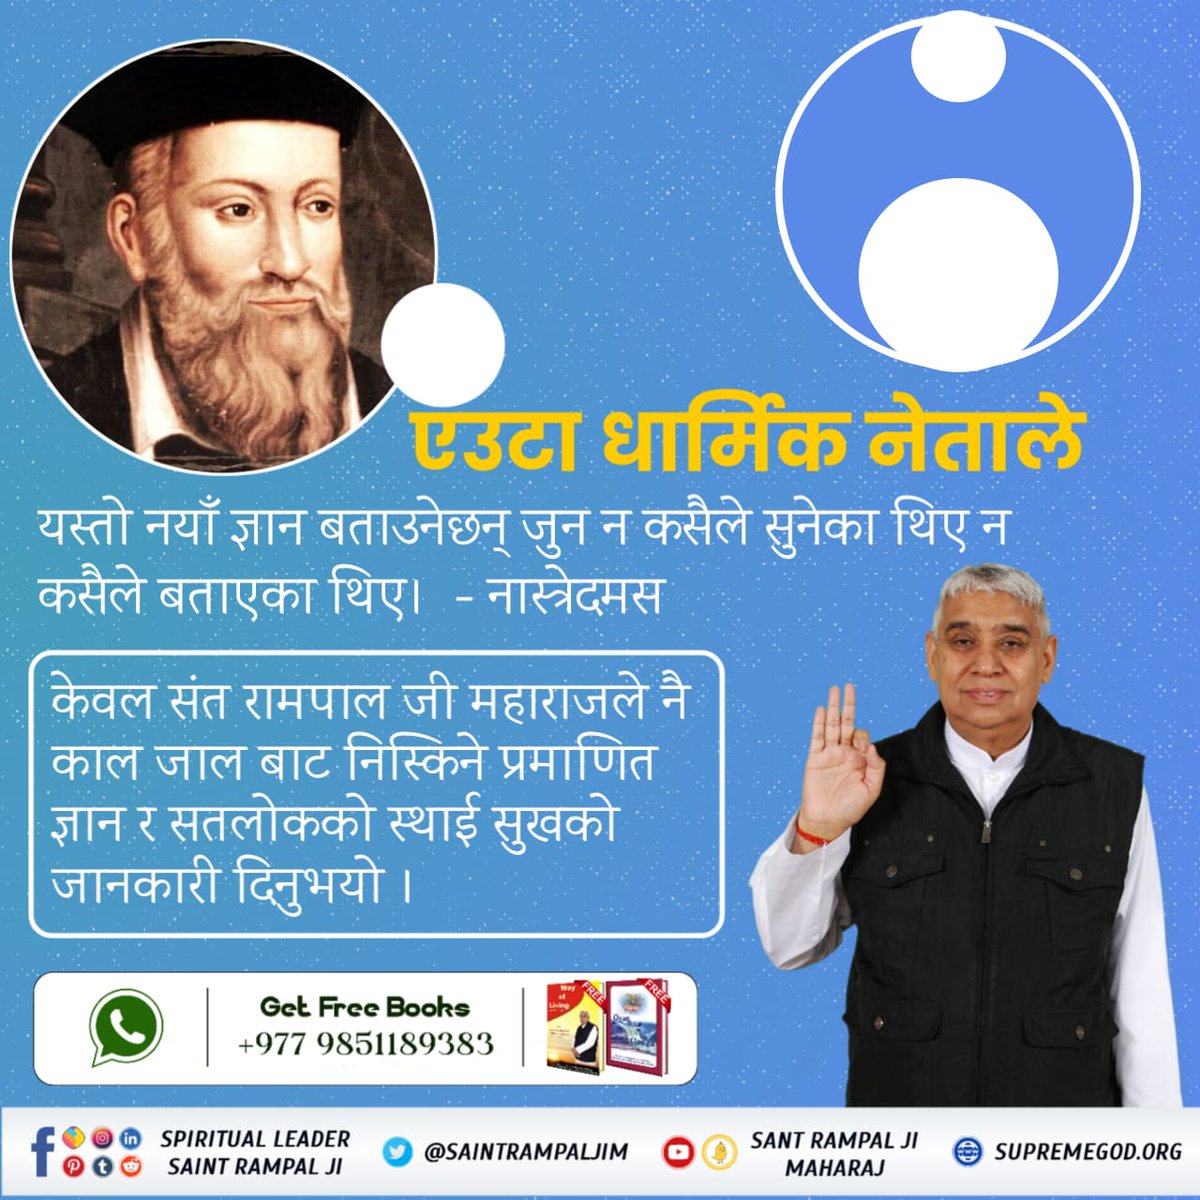 Prediction Of Mr. Anderson 
About the Savior Sant Rampalji Maharaj

' A Messiah will impregnate the entire world
with happiness and peace for the forthcoming 
thousands of years.'
#Prophecies_About_SantRampalJi